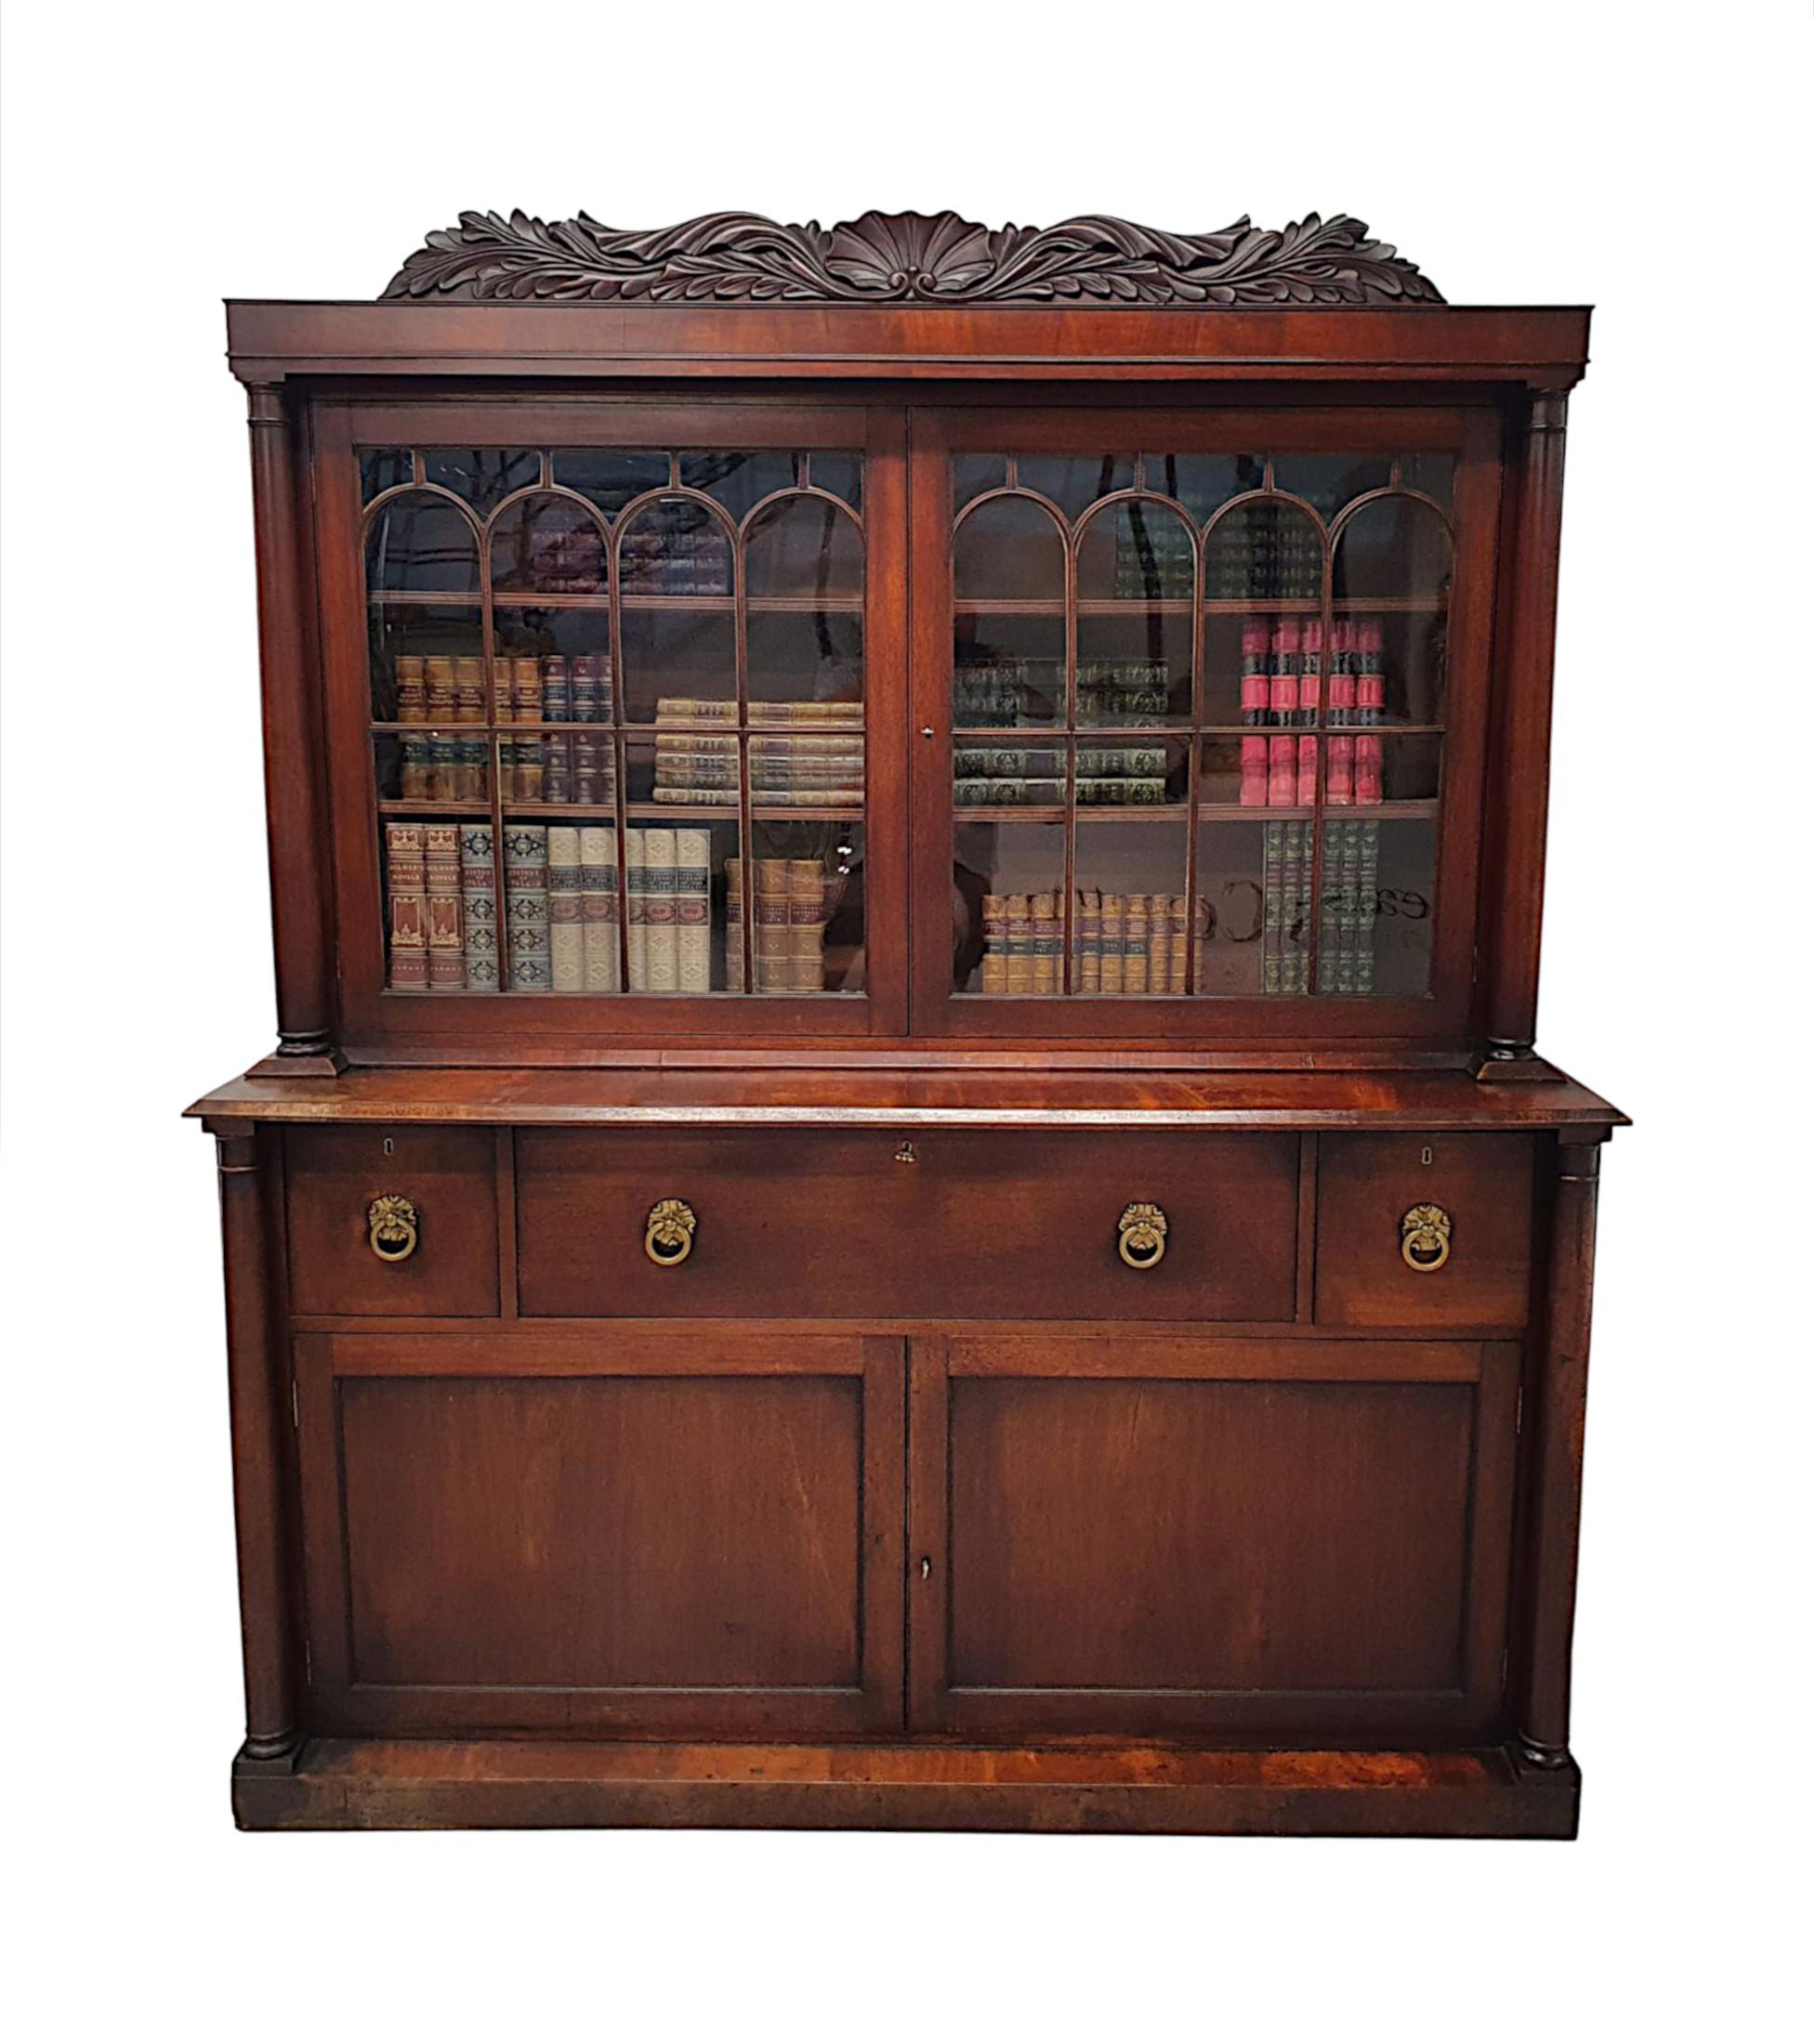 A rare and fine early 19th Century William IV Irish flame mahogany secretaire bookcase, beautifully hand carved with a rich patina.  The pediment with a stunning centred scallop shell flanked with scrolling foliate motif detail carved in high